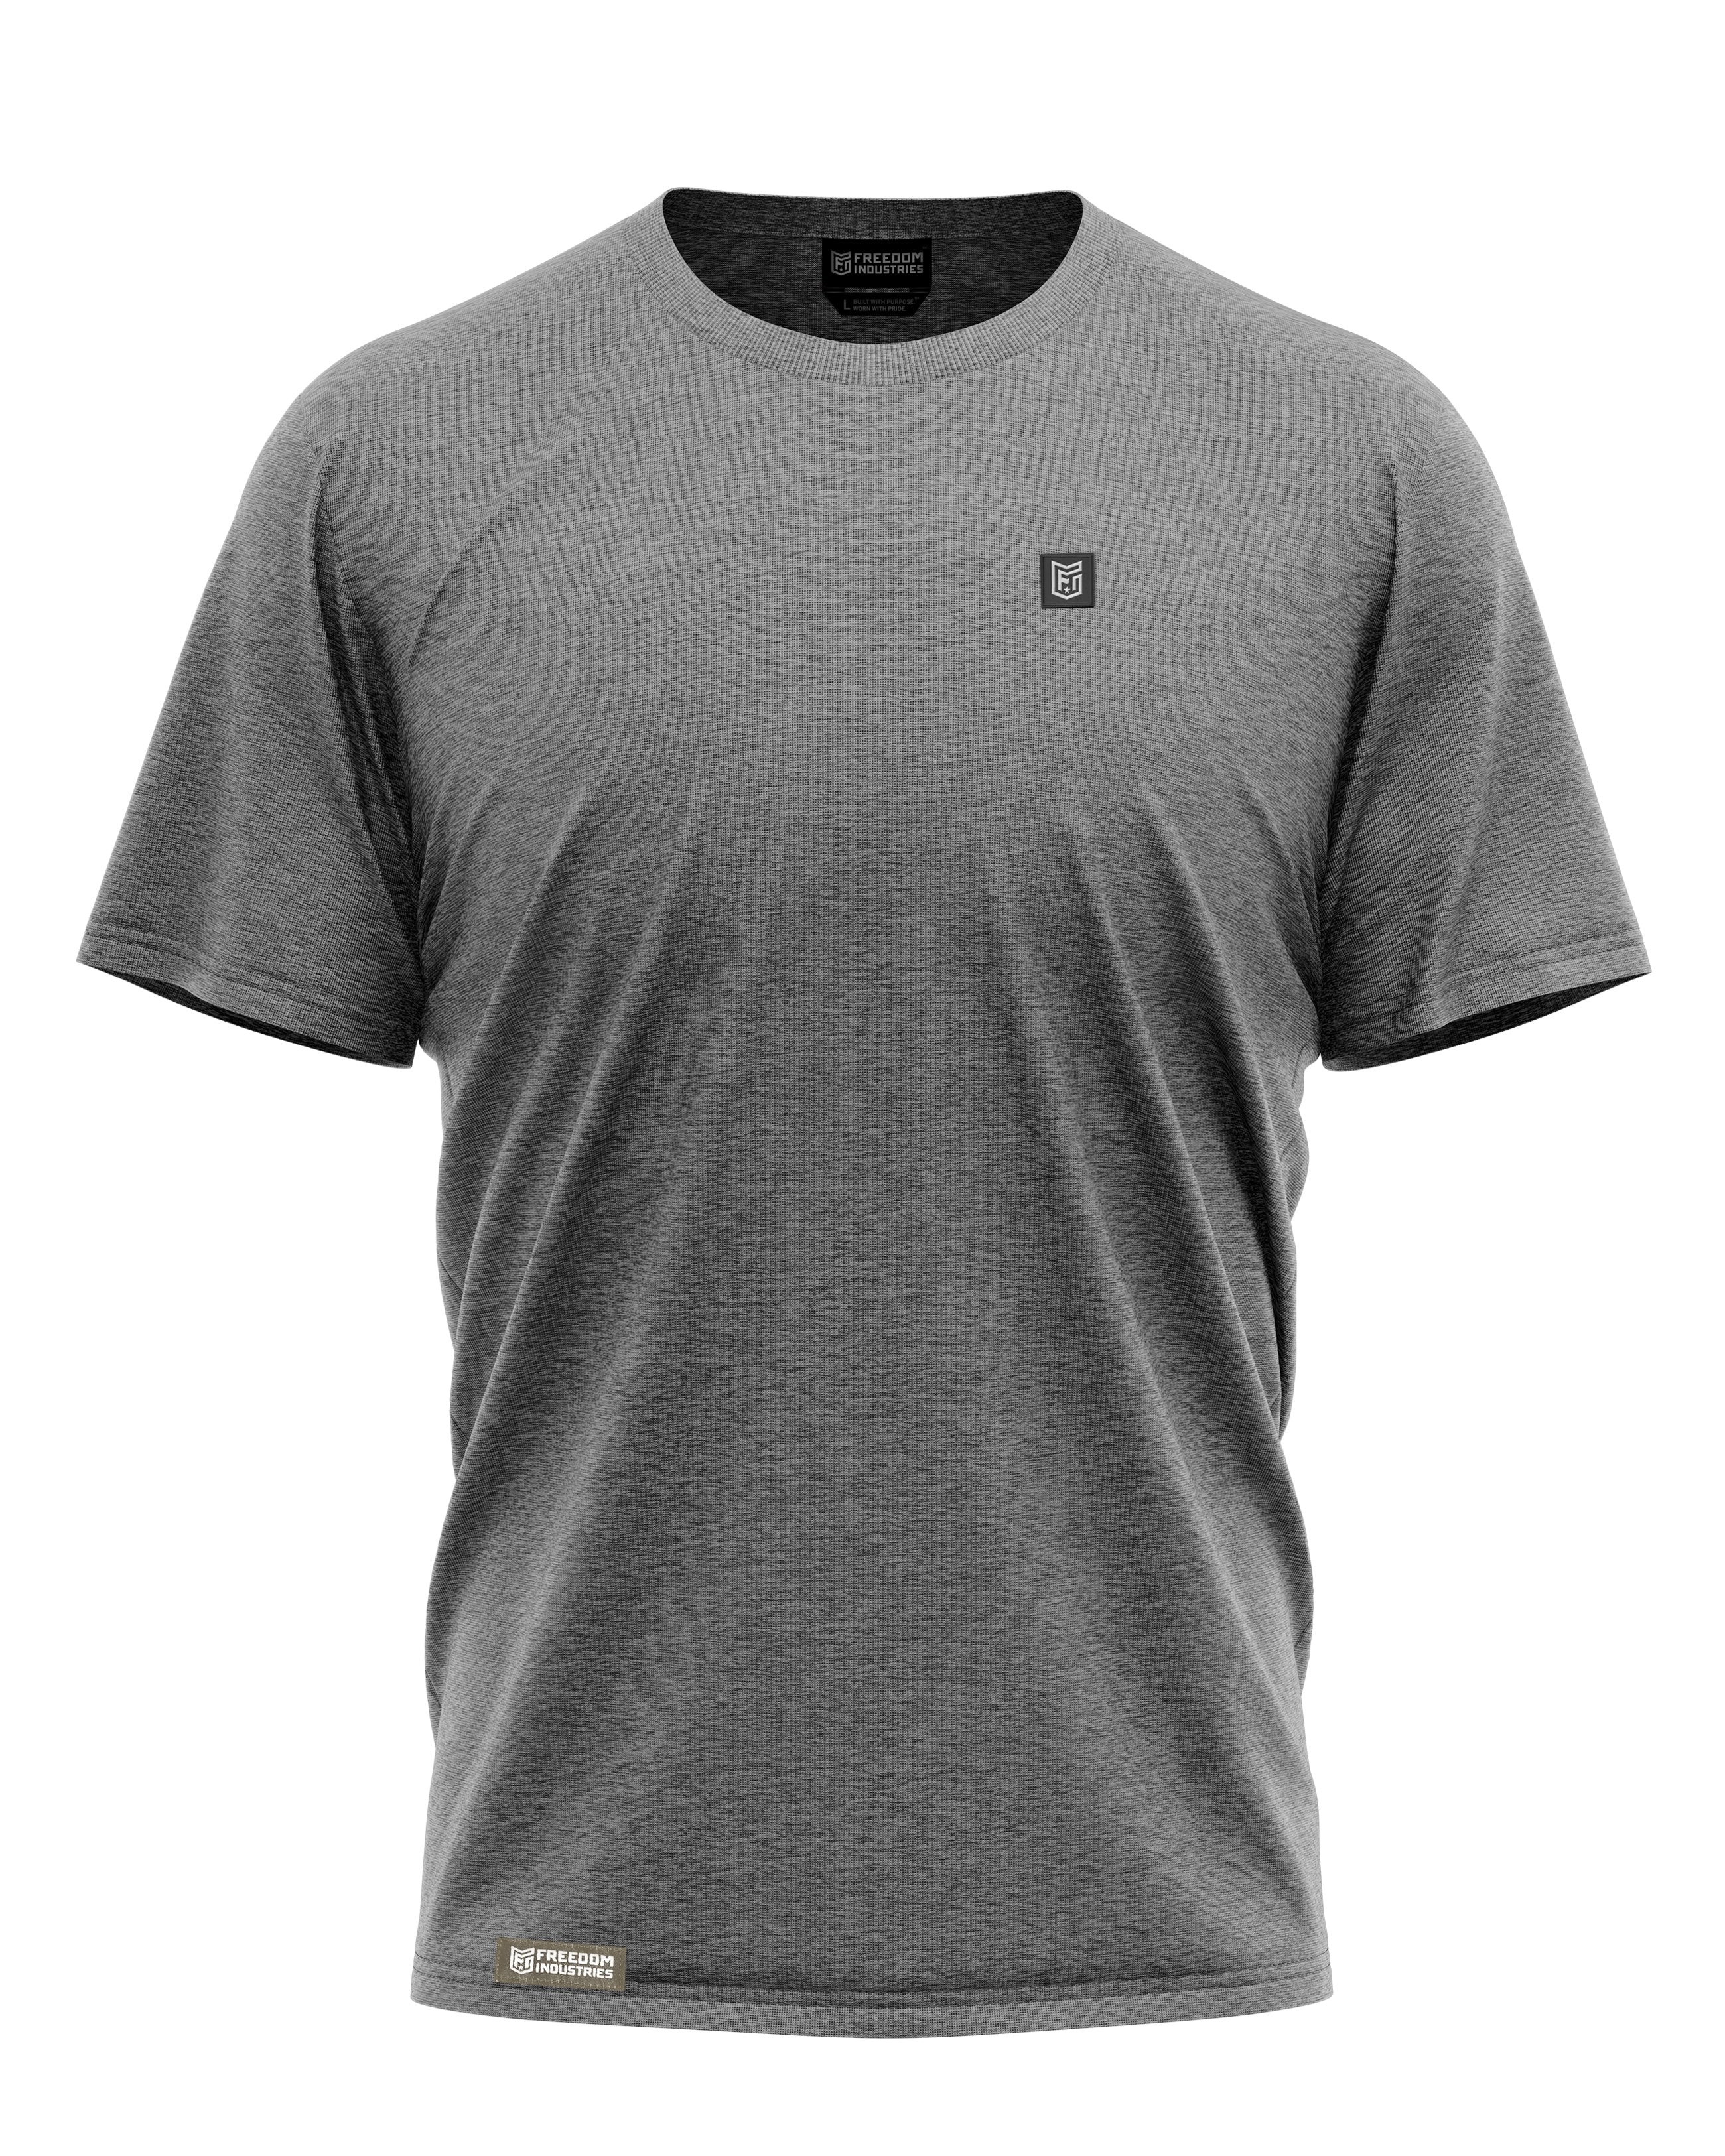 F.I.E.L.D. WORKWEAR DAILY SHIRT - GRAPHITE - FREEDOM INDUSTRIES (4452038377544) (4452068917320)